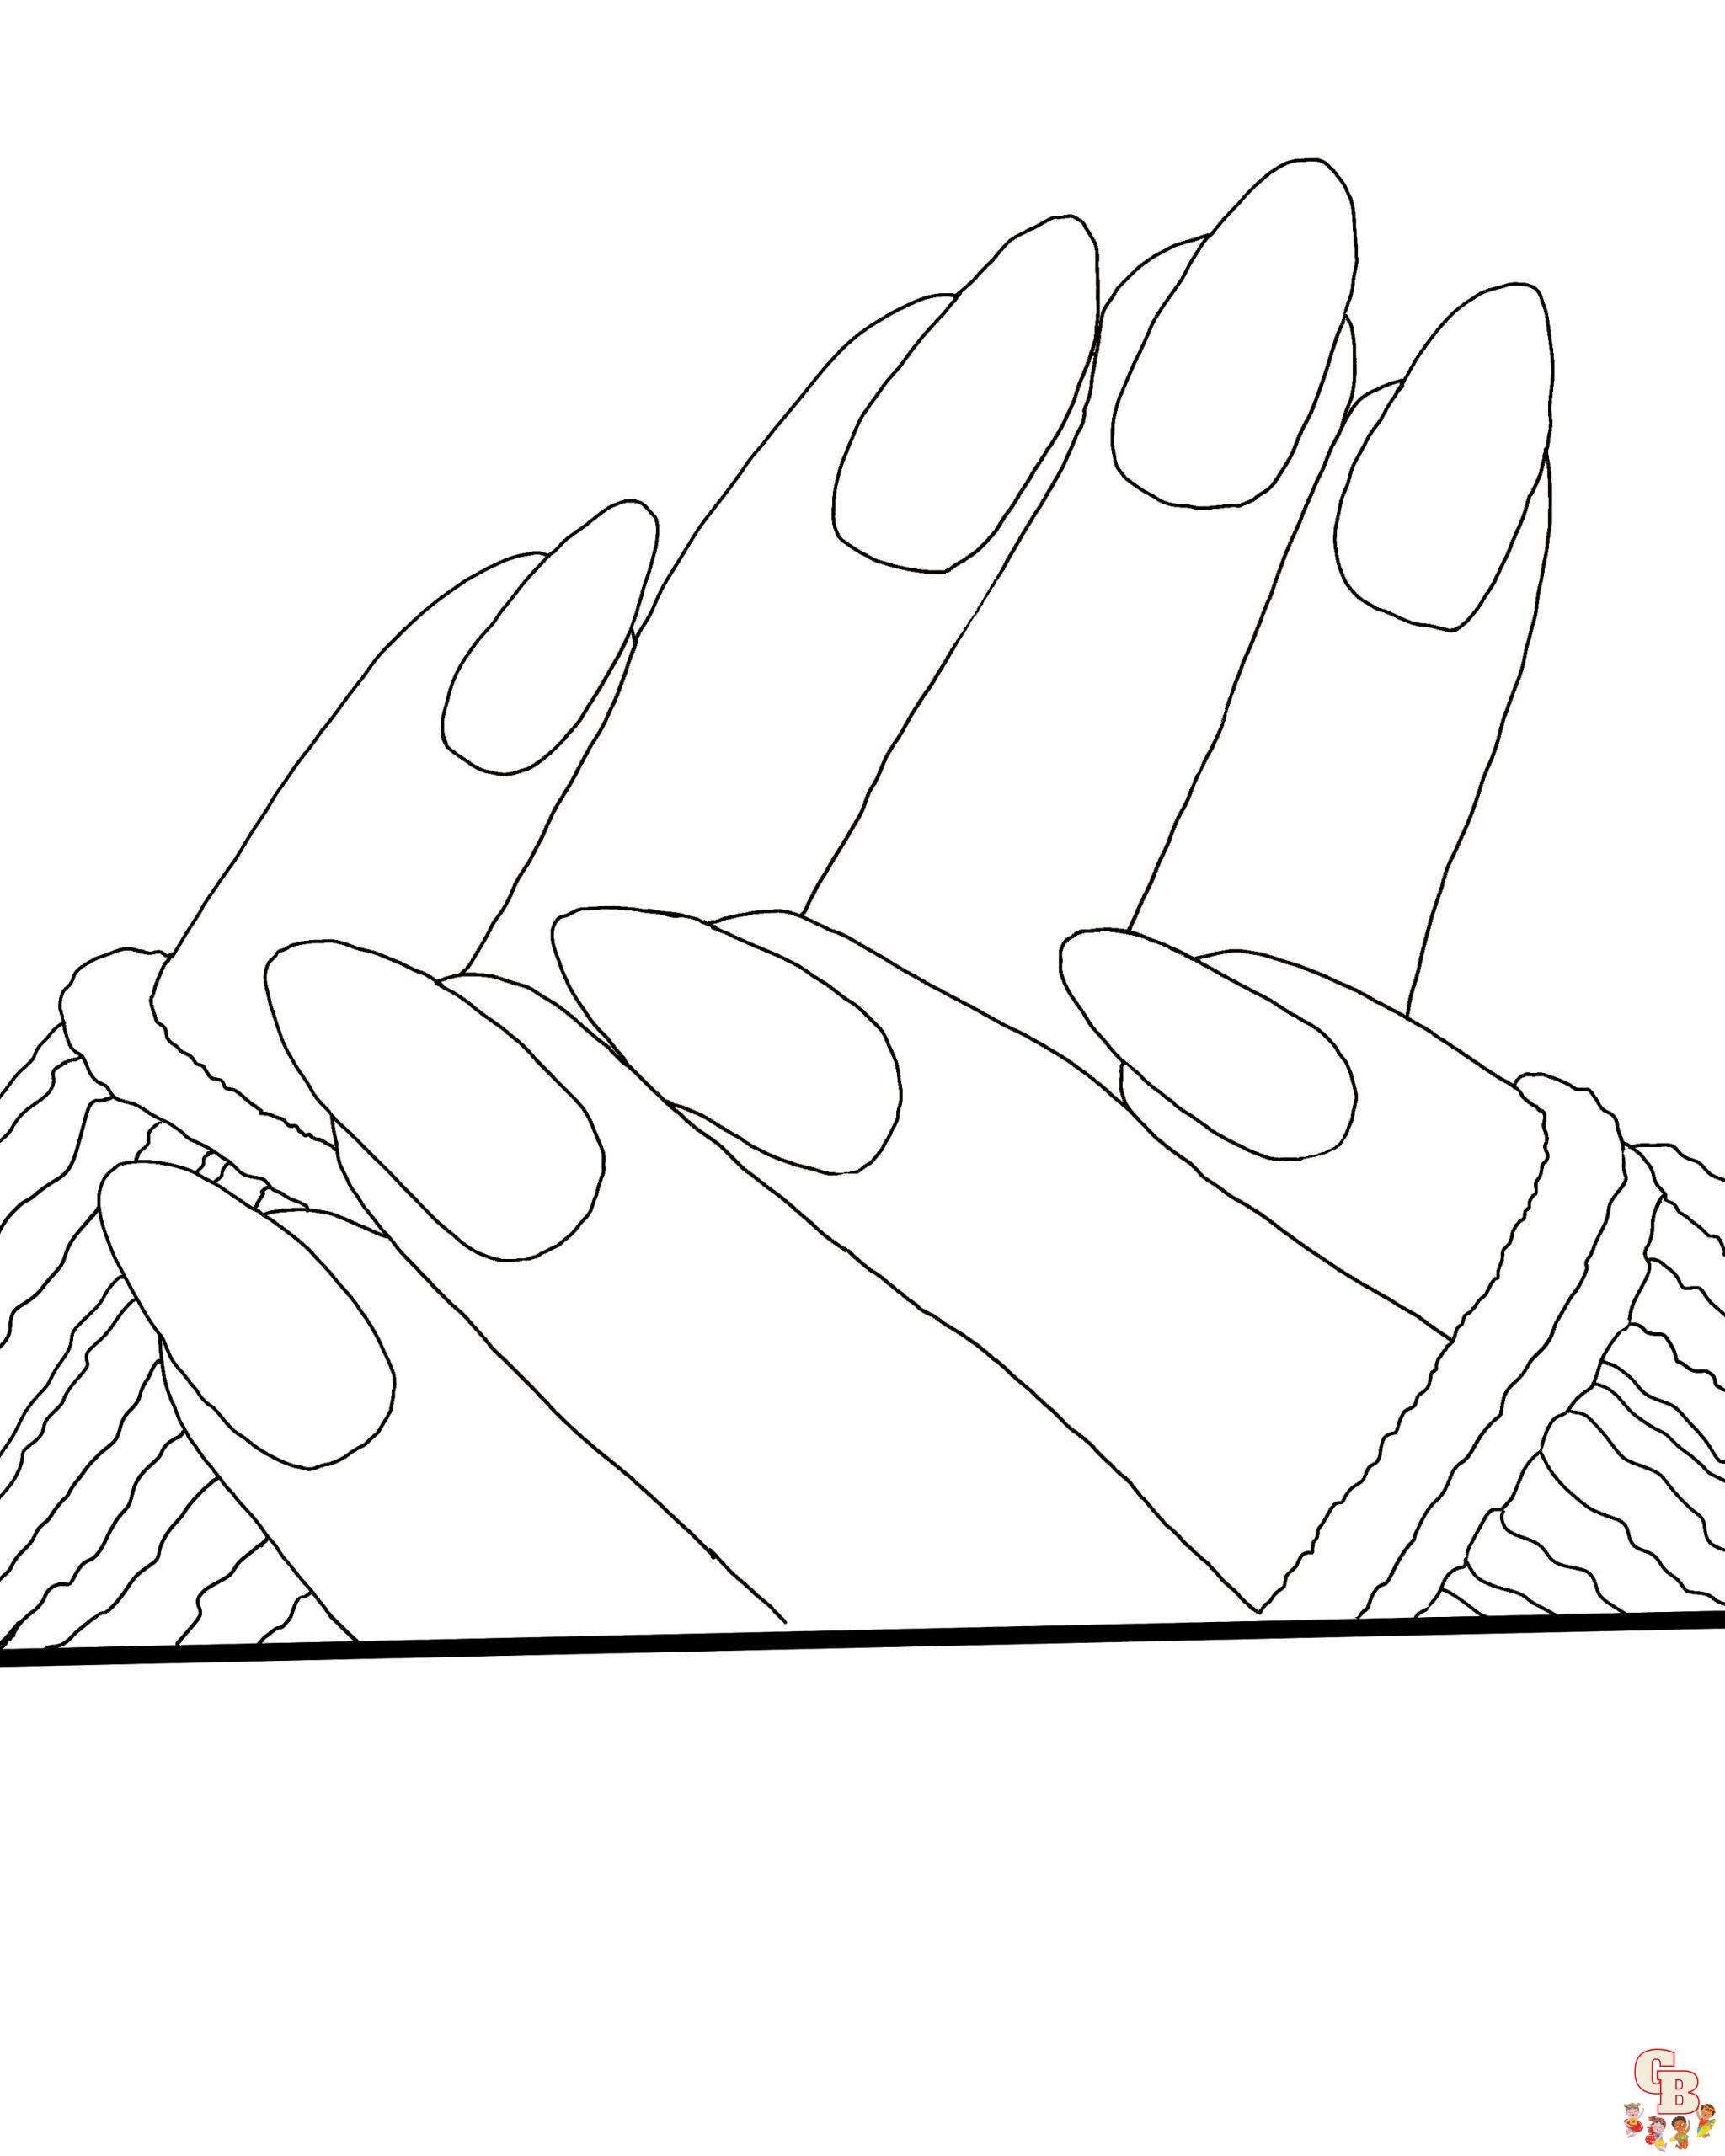 Printable nail coloring pages free for kids and adults